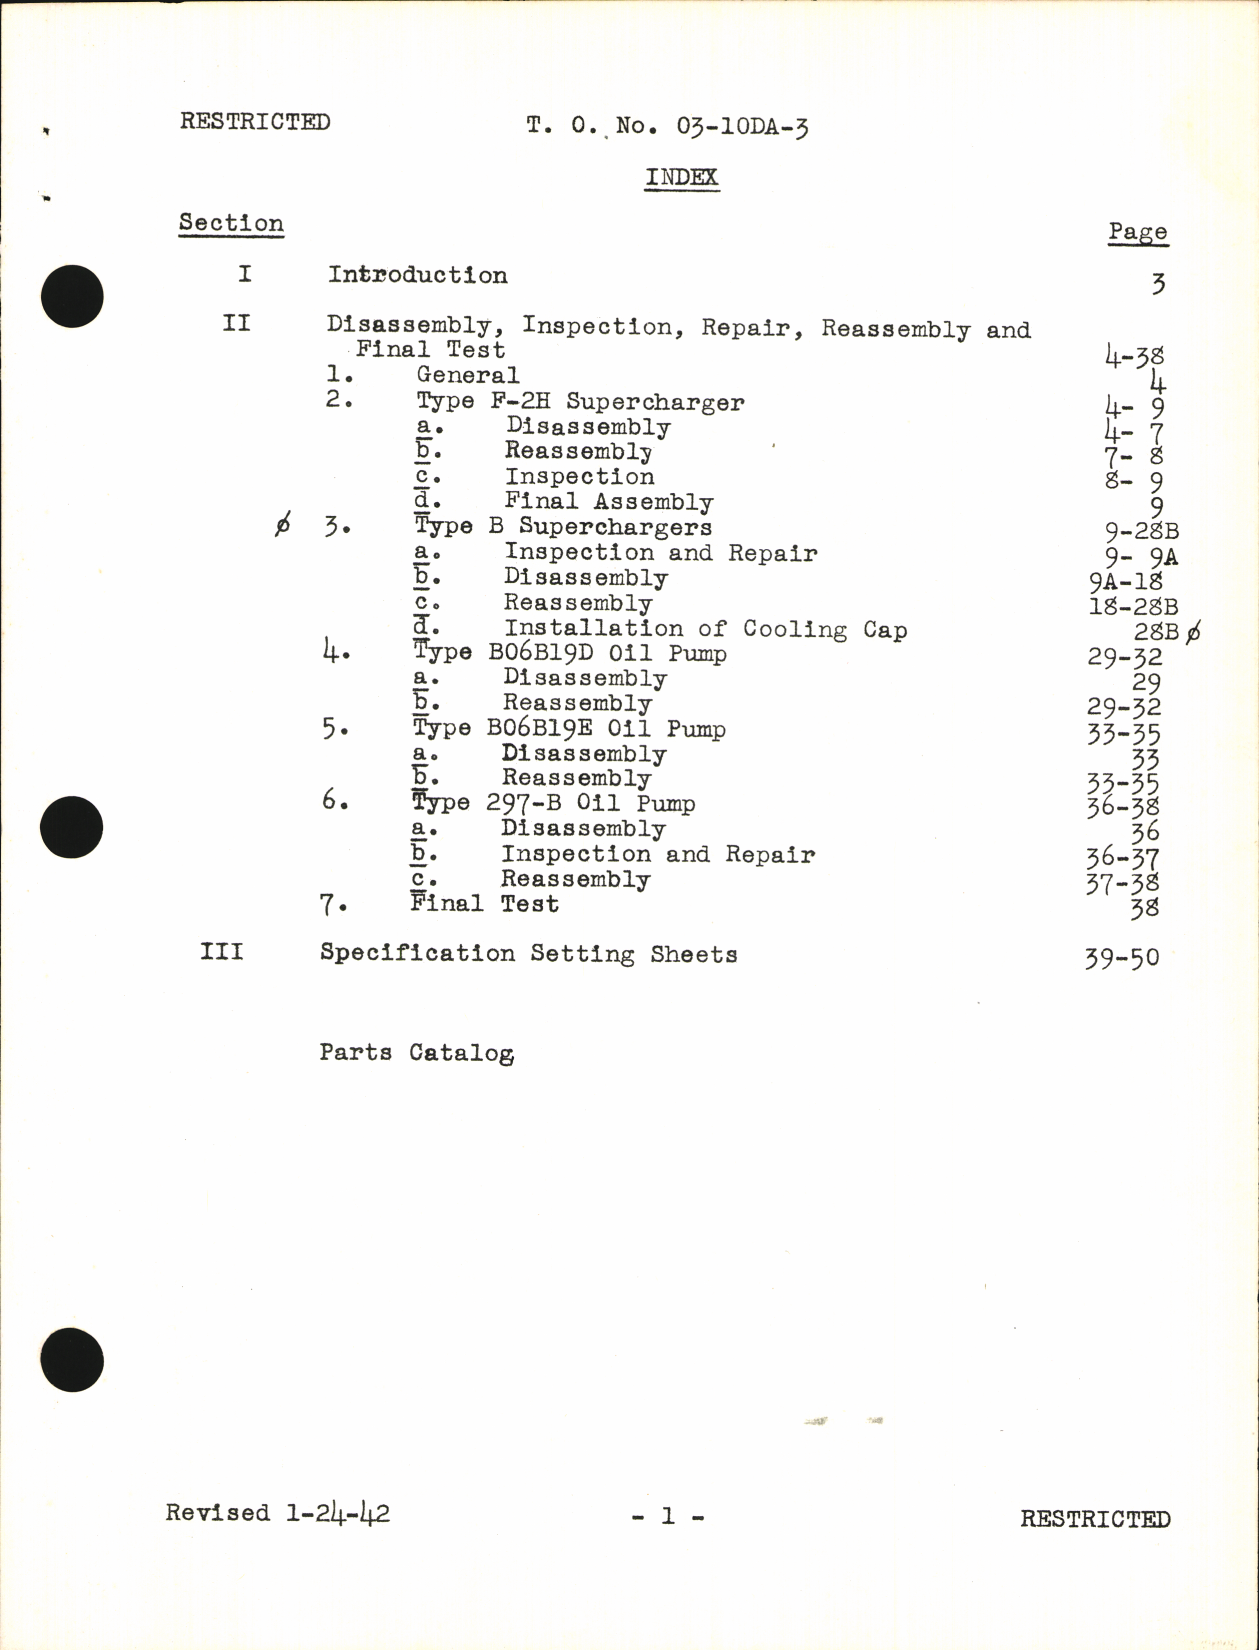 Sample page 5 from AirCorps Library document: Overhaul Instructions with Parts Catalog for Turbine Driven Superchargers